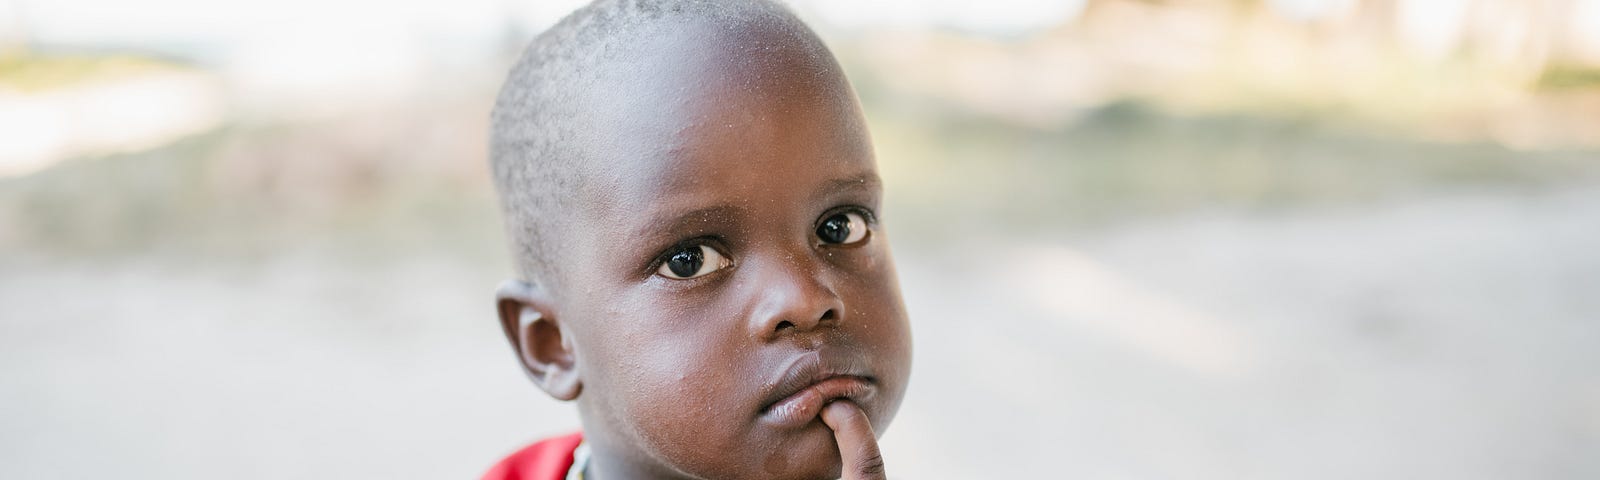 Cute African boy in thought